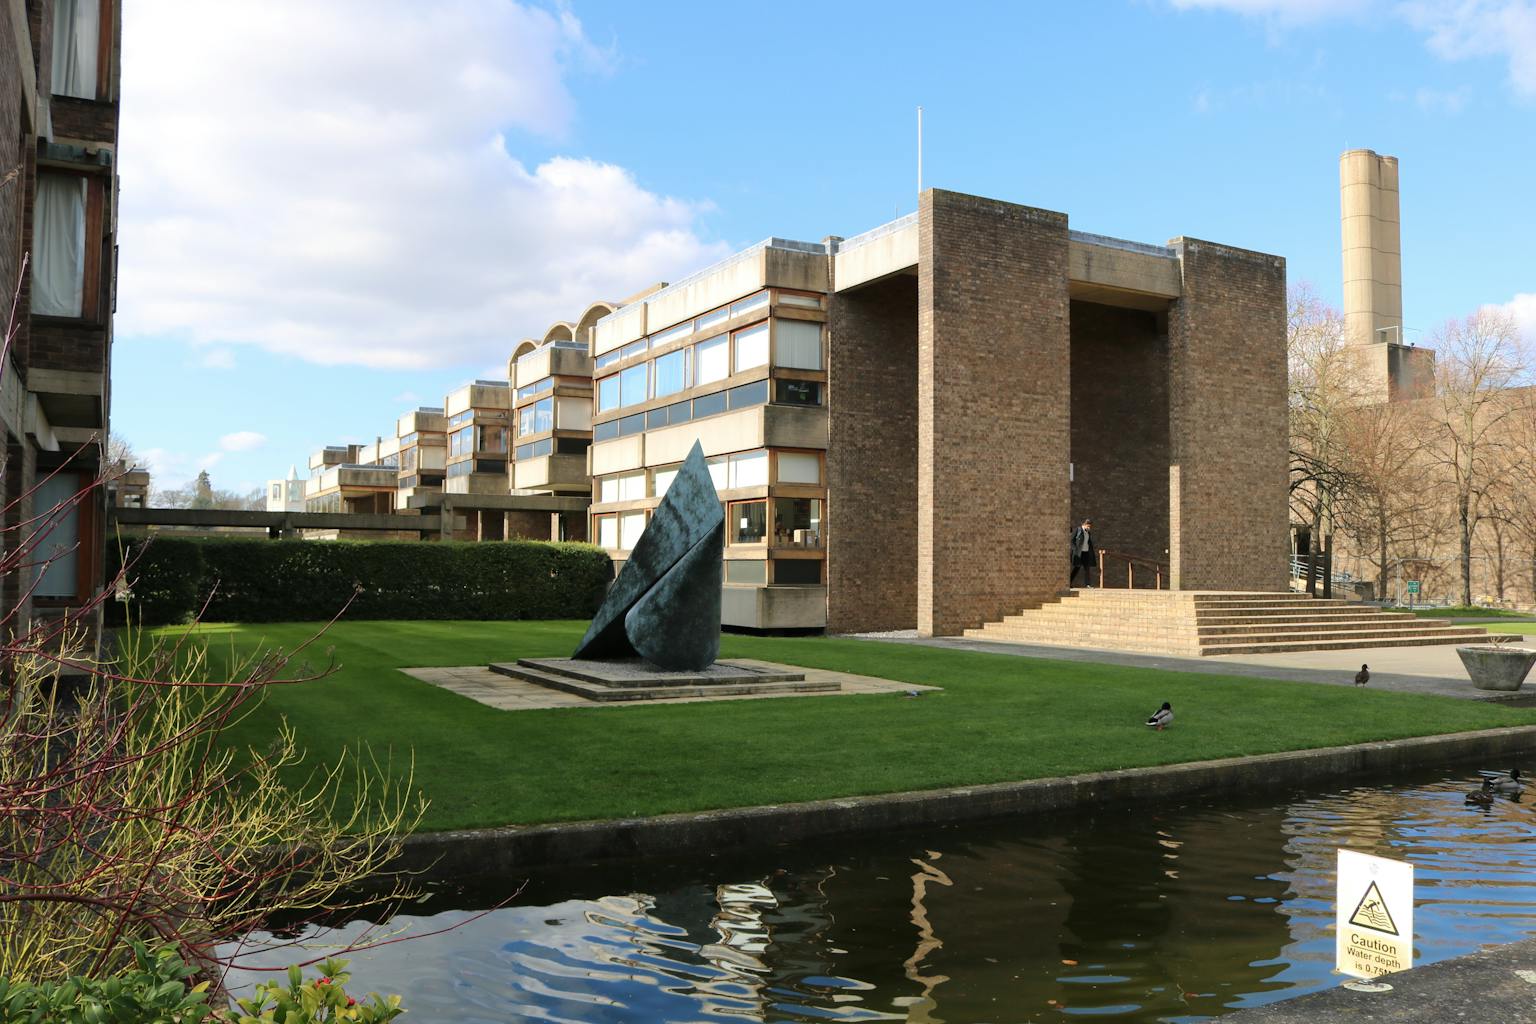 The Heritage Appraisal for Churchill College, Cambridge incorporated potential for change analysis and heritage design parameters that explored in more detail how an understanding of the site's significance could provide the basis for future decision-making.